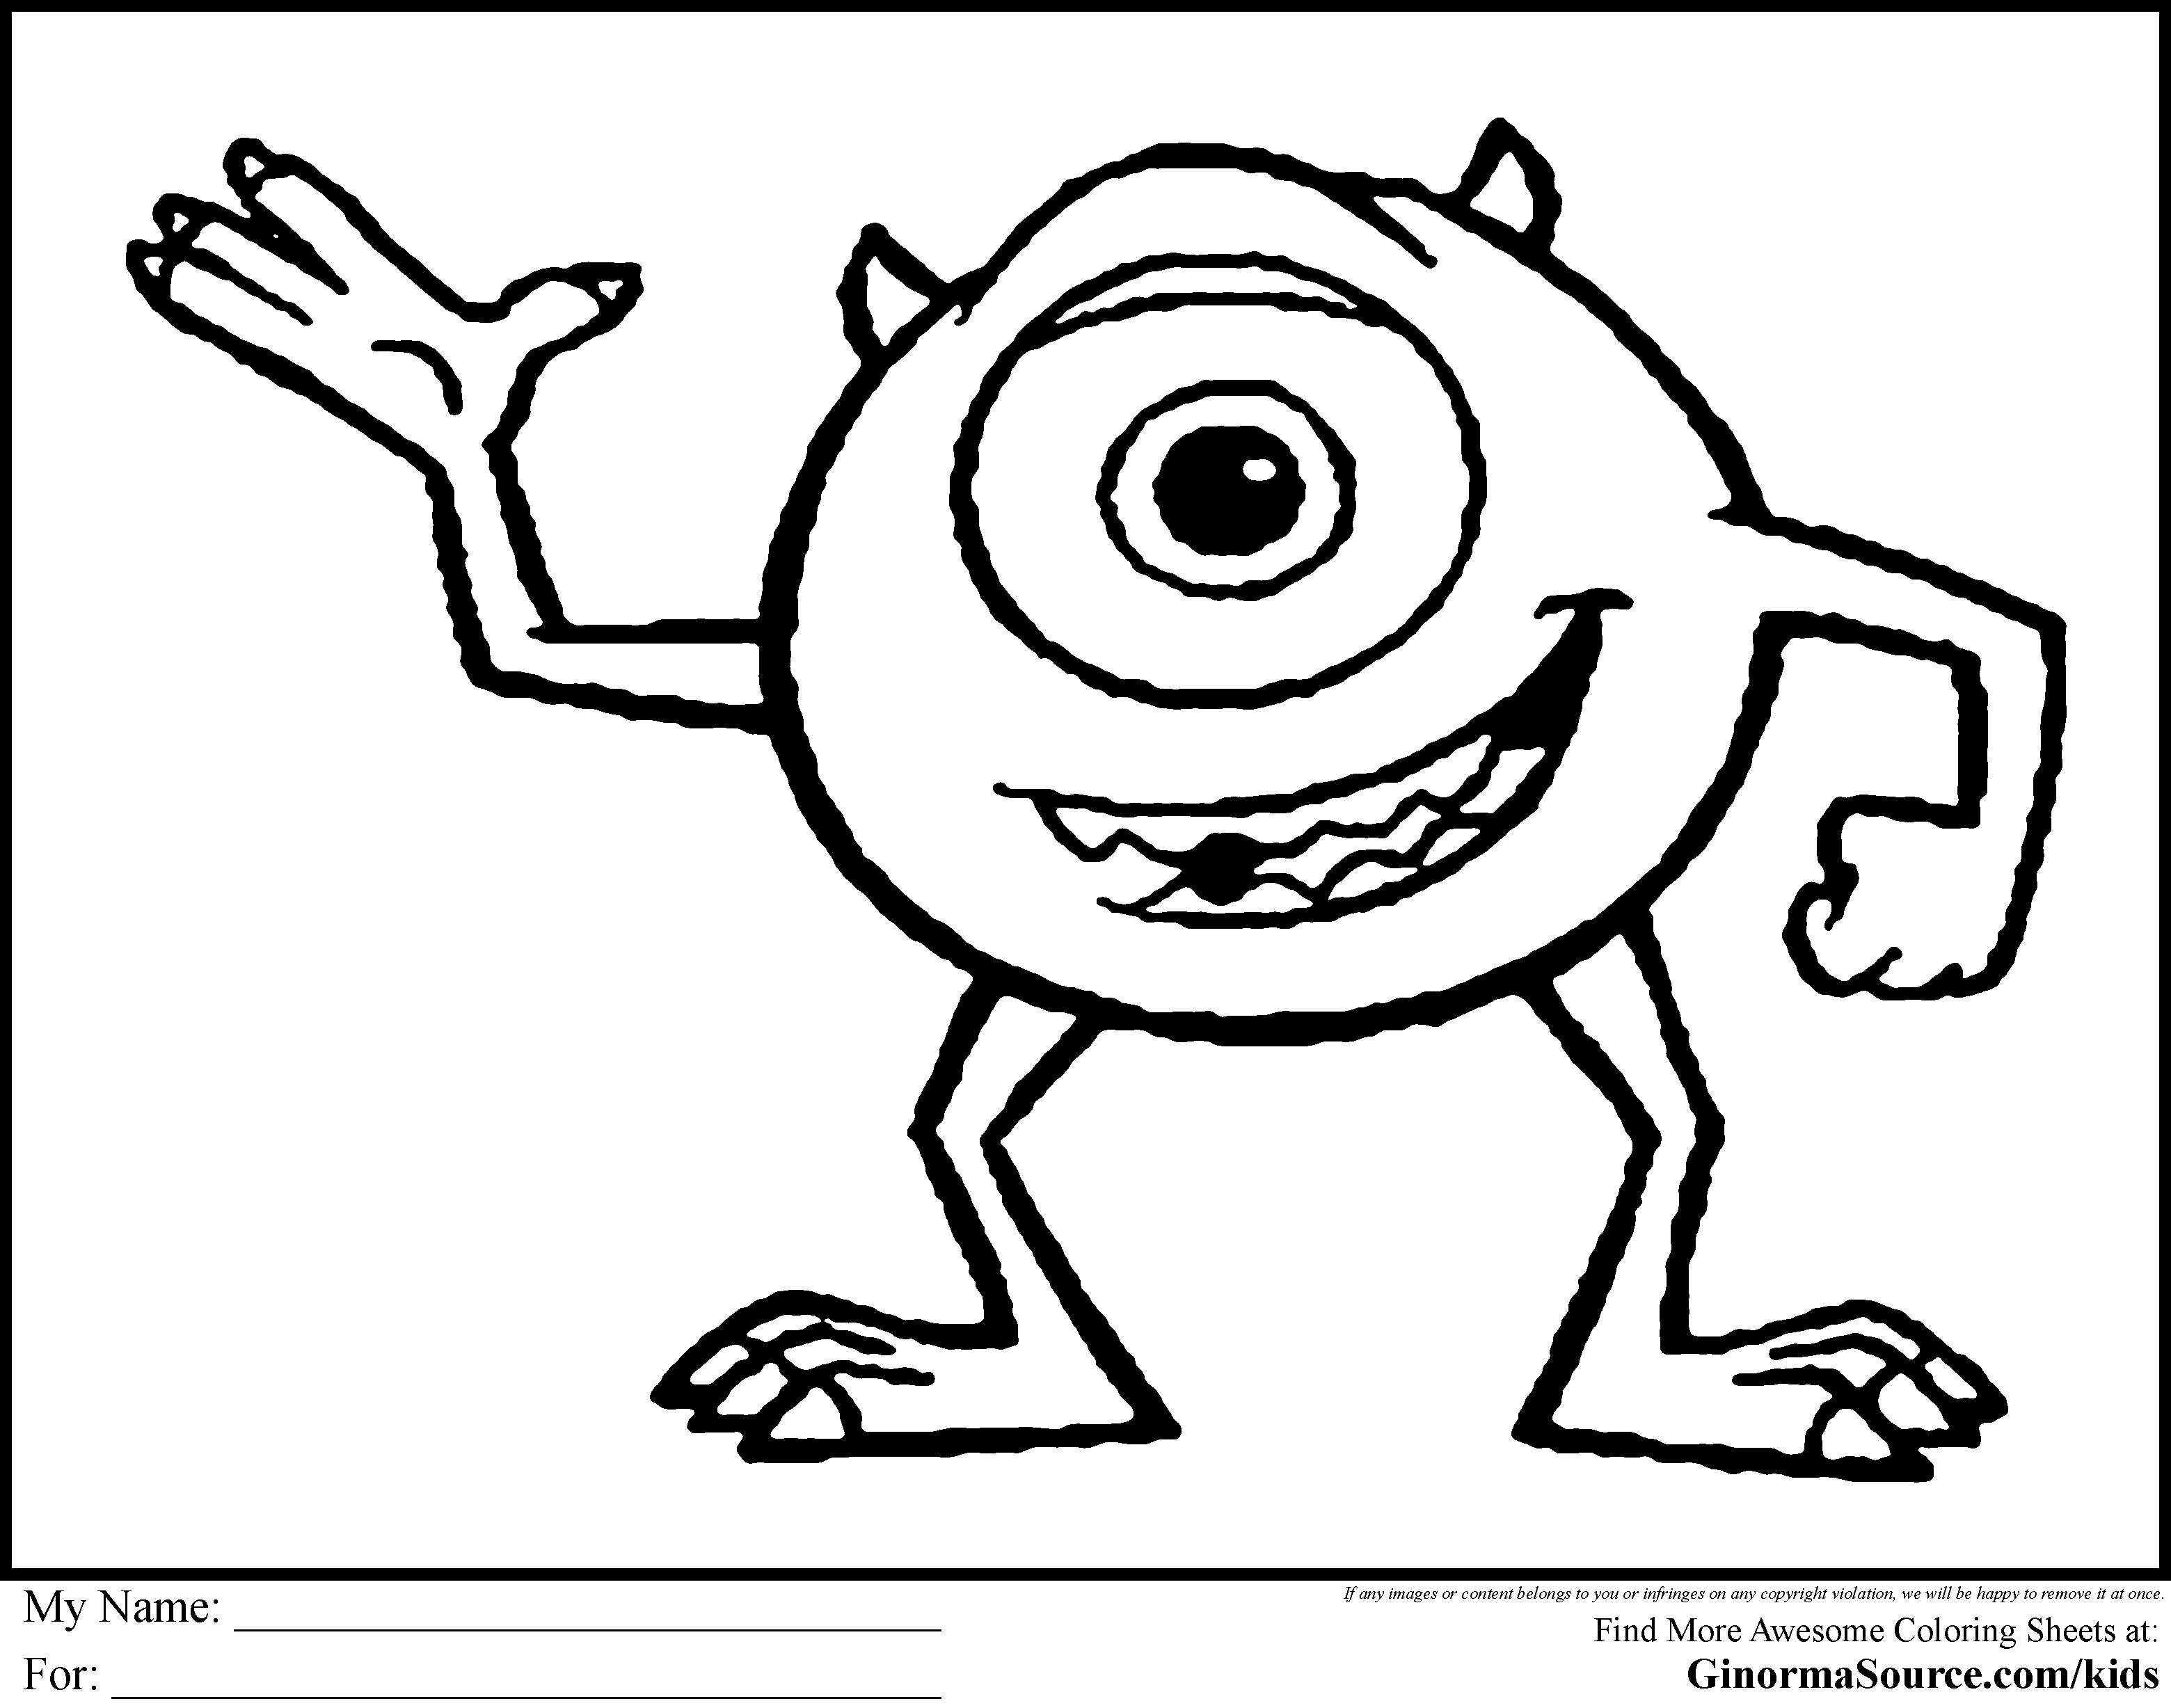 Baby Mike Wazowski Coloring Pages - Coloring Home